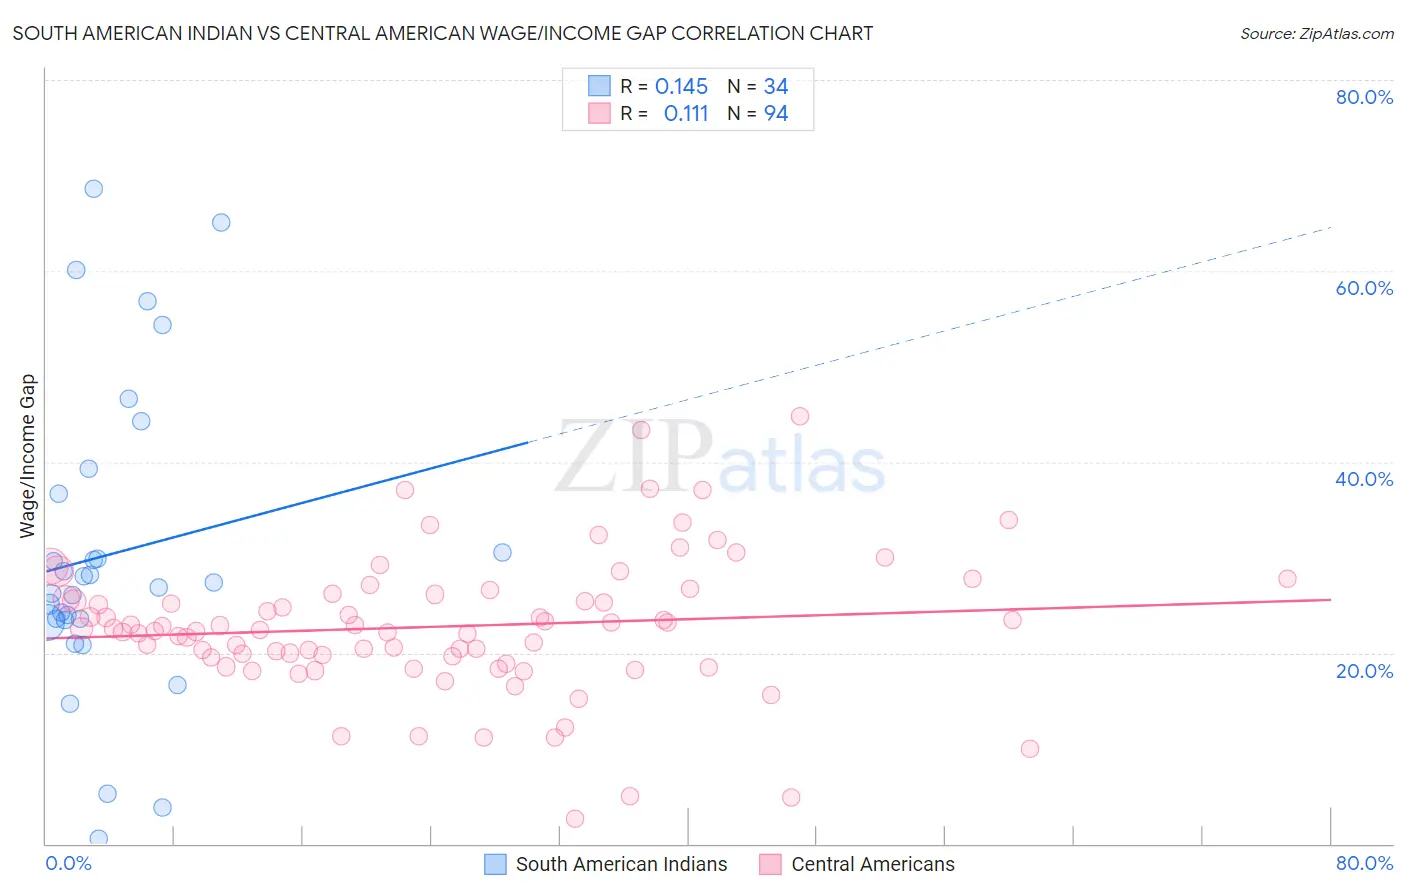 South American Indian vs Central American Wage/Income Gap